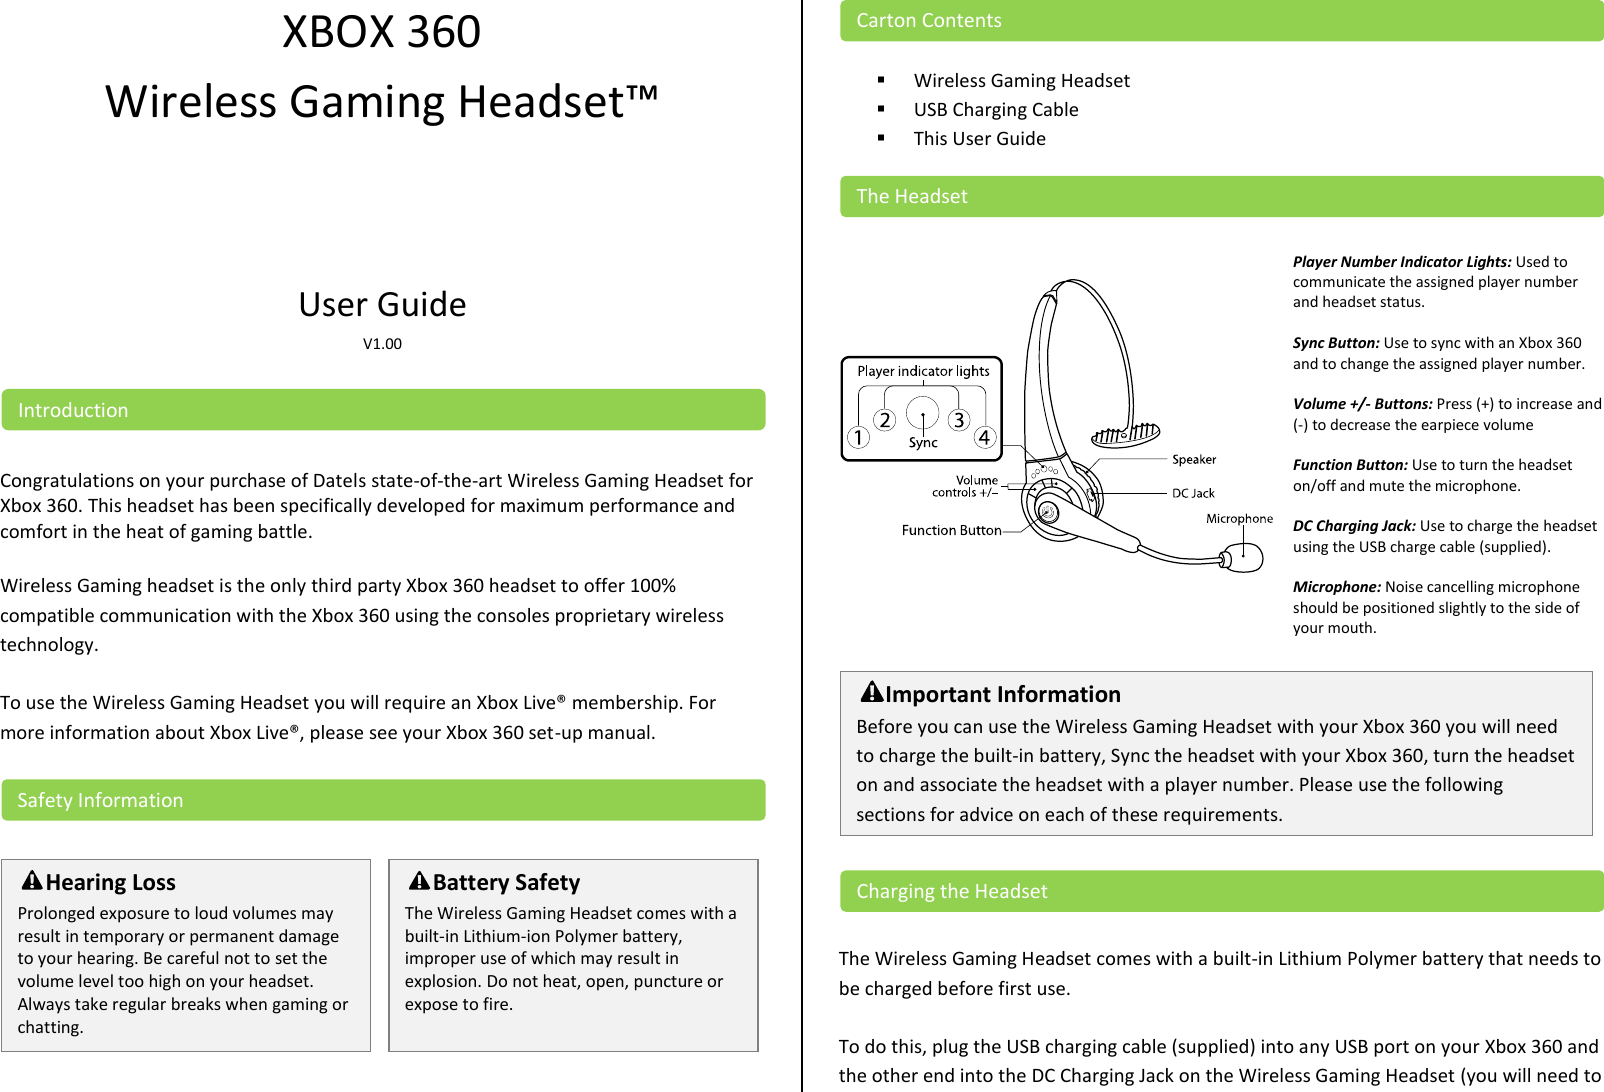 XBOX 360 Wireless Gaming Headset™   User Guide  V1.00    Congratulations on your purchase of Datels state-of-the-art Wireless Gaming Headset for Xbox 360. This headset has been specifically developed for maximum performance and comfort in the heat of gaming battle.  Wireless Gaming headset is the only third party Xbox 360 headset to offer 100% compatible communication with the Xbox 360 using the consoles proprietary wireless technology.  To use the Wireless Gaming Headset you will require an Xbox Live® membership. For more information about Xbox Live®, please see your Xbox 360 set-up manual.            Wireless Gaming Headset  USB Charging Cable  This User Guide     Player Number Indicator Lights: Used to communicate the assigned player number and headset status.  Sync Button: Use to sync with an Xbox 360 and to change the assigned player number.  Volume +/- Buttons: Press (+) to increase and (-) to decrease the earpiece volume  Function Button: Use to turn the headset on/off and mute the microphone.  DC Charging Jack: Use to charge the headset using the USB charge cable (supplied).  Microphone: Noise cancelling microphone should be positioned slightly to the side of your mouth.      The Wireless Gaming Headset comes with a built-in Lithium Polymer battery that needs to be charged before first use.   To do this, plug the USB charging cable (supplied) into any USB port on your Xbox 360 and the other end into the DC Charging Jack on the Wireless Gaming Headset (you will need to Charging the Headset Important Information Before you can use the Wireless Gaming Headset with your Xbox 360 you will need to charge the built-in battery, Sync the headset with your Xbox 360, turn the headset on and associate the headset with a player number. Please use the following sections for advice on each of these requirements.  The Headset Carton Contents Battery Safety The Wireless Gaming Headset comes with a built-in Lithium-ion Polymer battery, improper use of which may result in explosion. Do not heat, open, puncture or expose to fire.  Hearing Loss Prolonged exposure to loud volumes may result in temporary or permanent damage to your hearing. Be careful not to set the volume level too high on your headset. Always take regular breaks when gaming or chatting.  Safety Information Introduction 